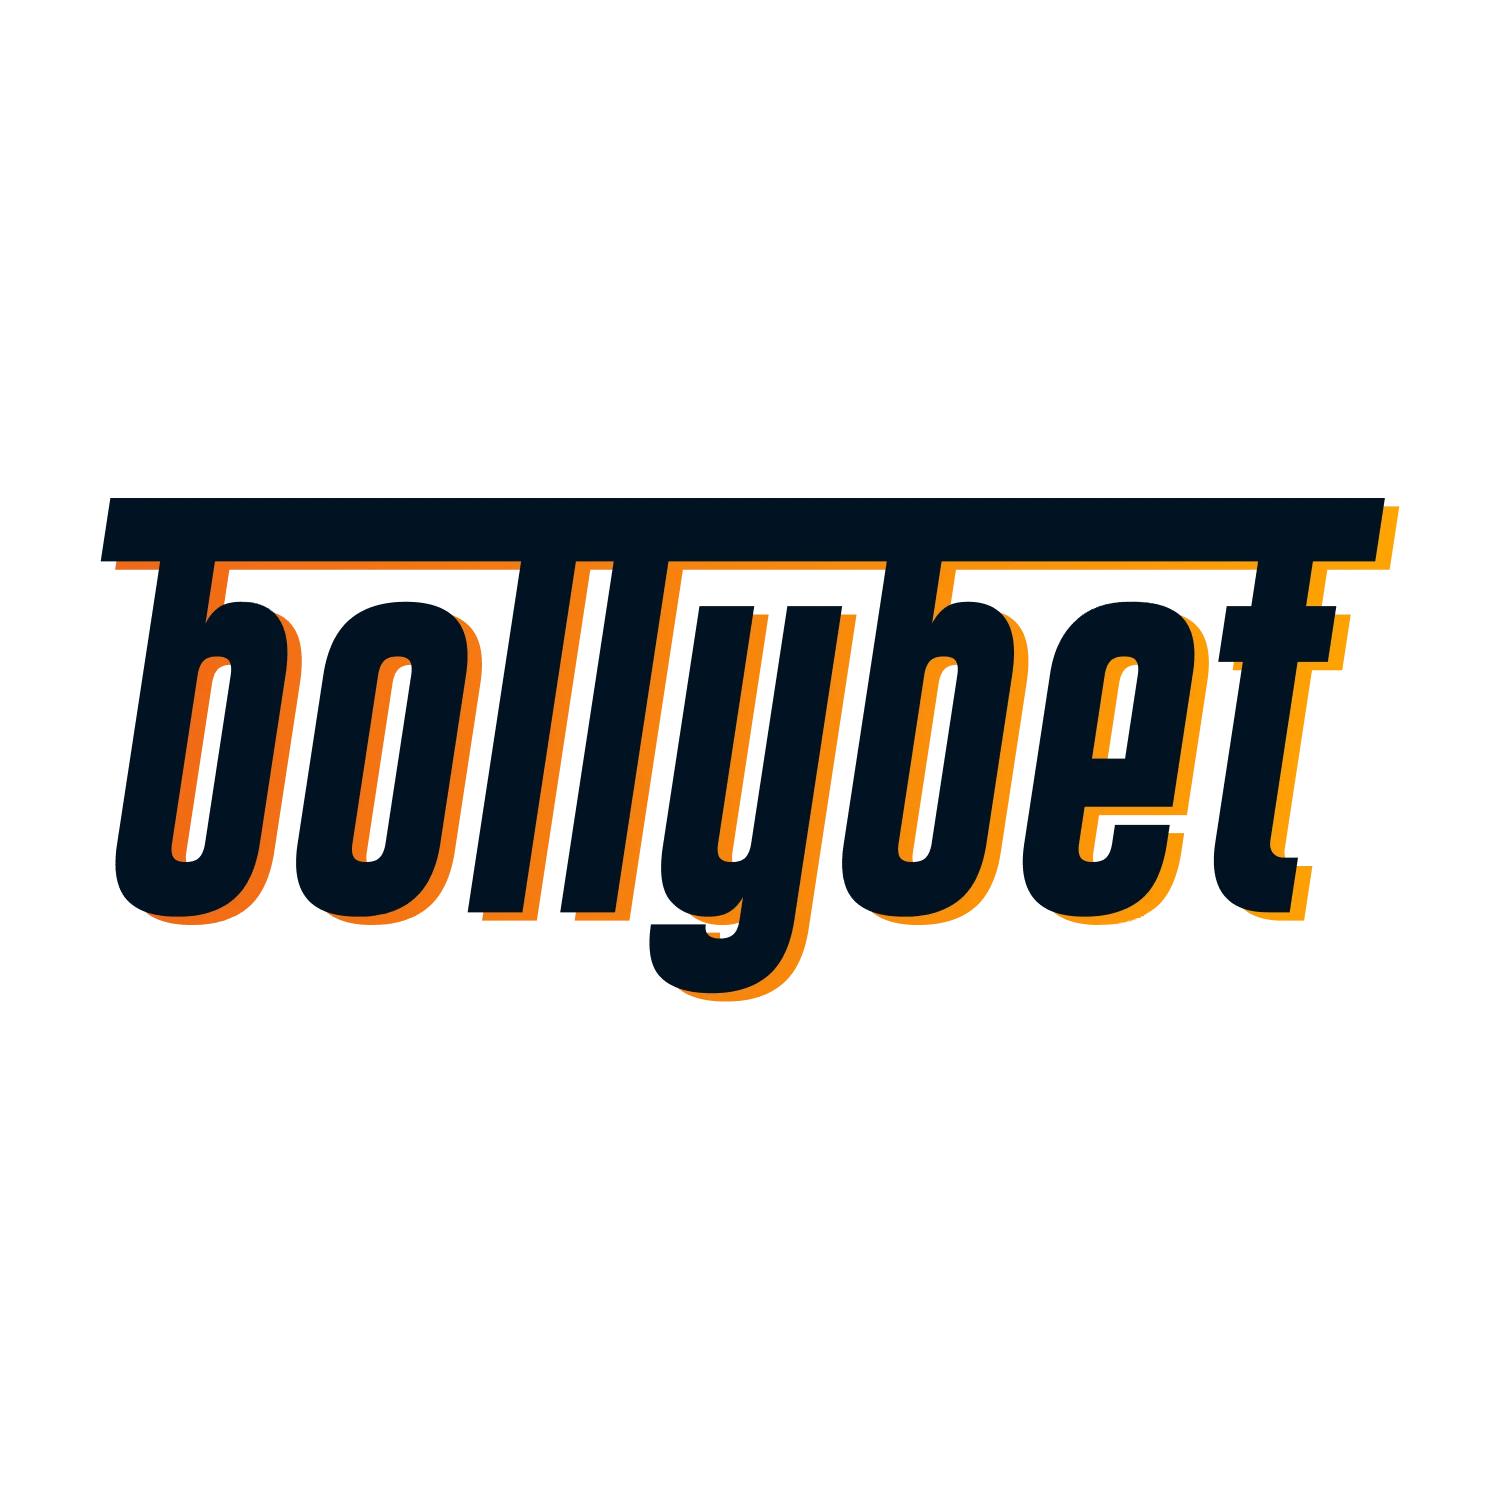 Learn how to sign up and bet on cricket on Bollybet.